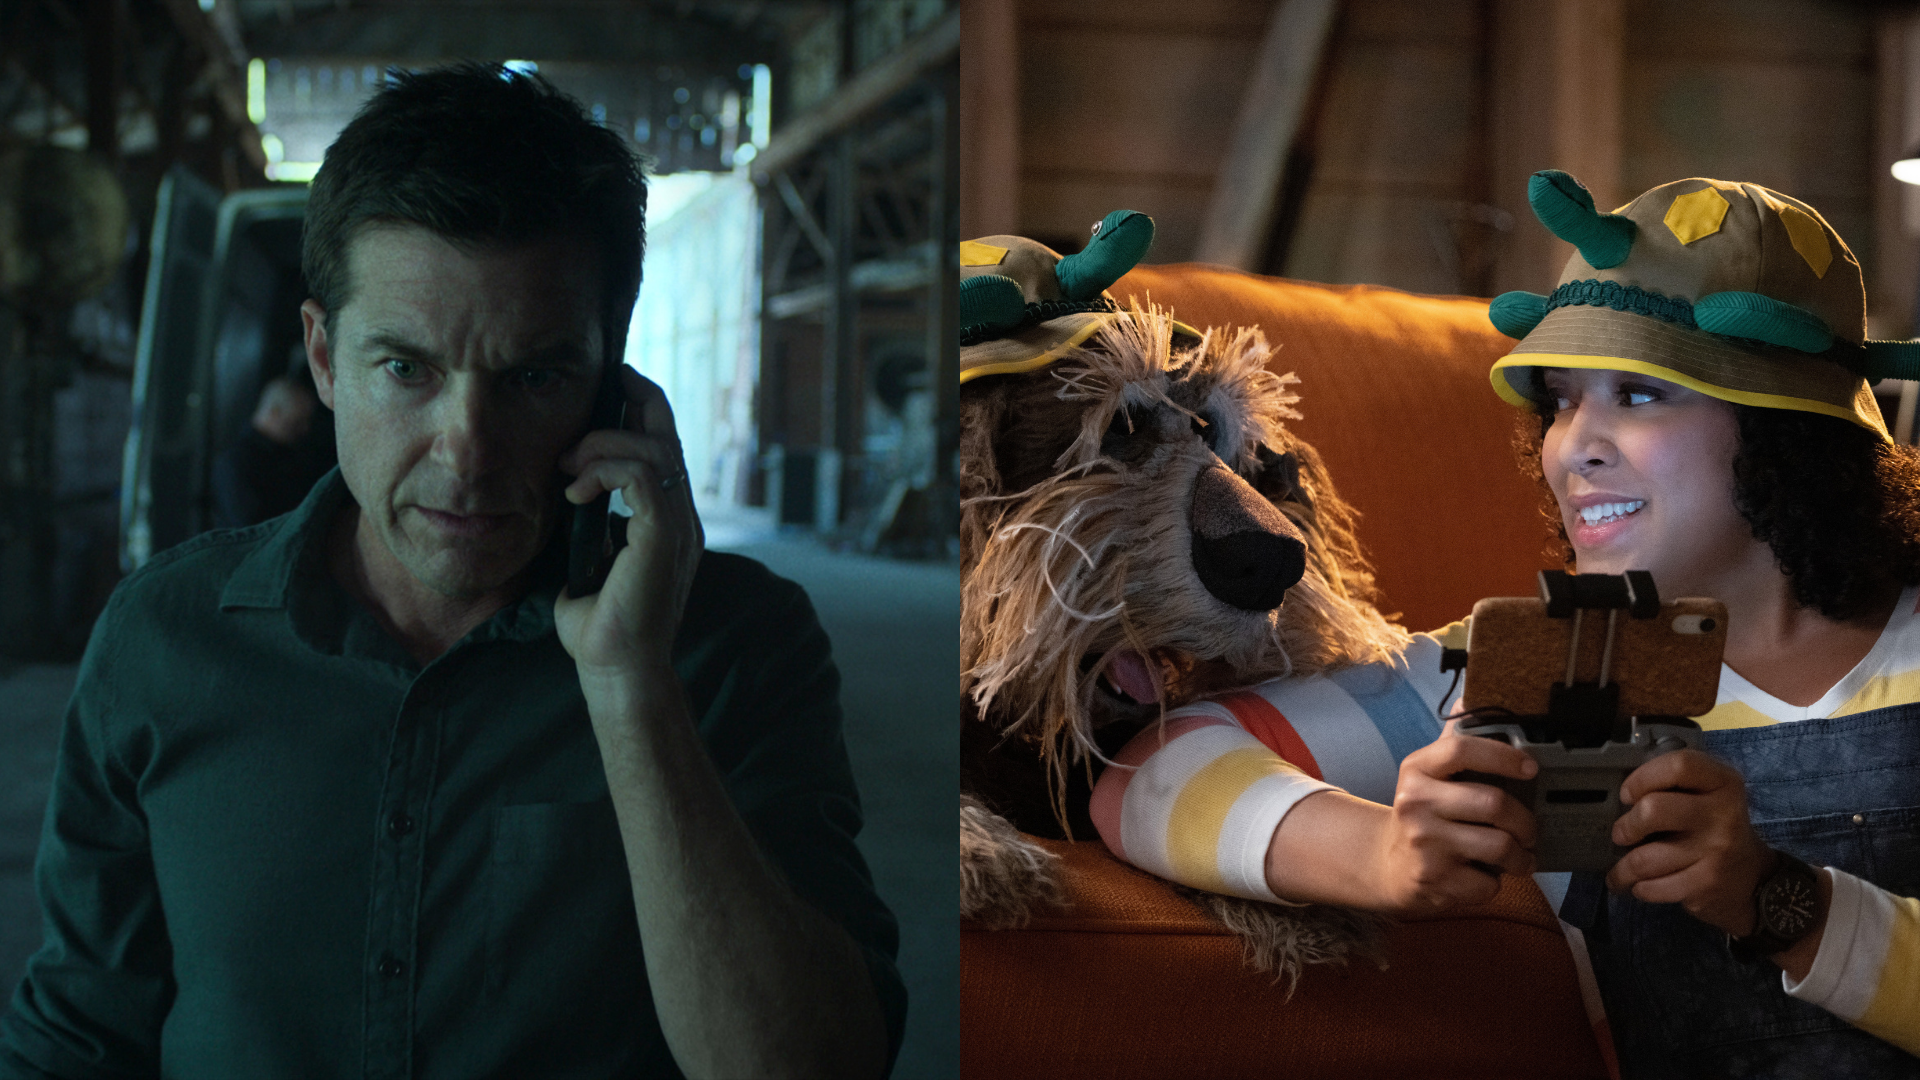 Ozark and Fraggle Rock serve up excellent new seasons this weekend